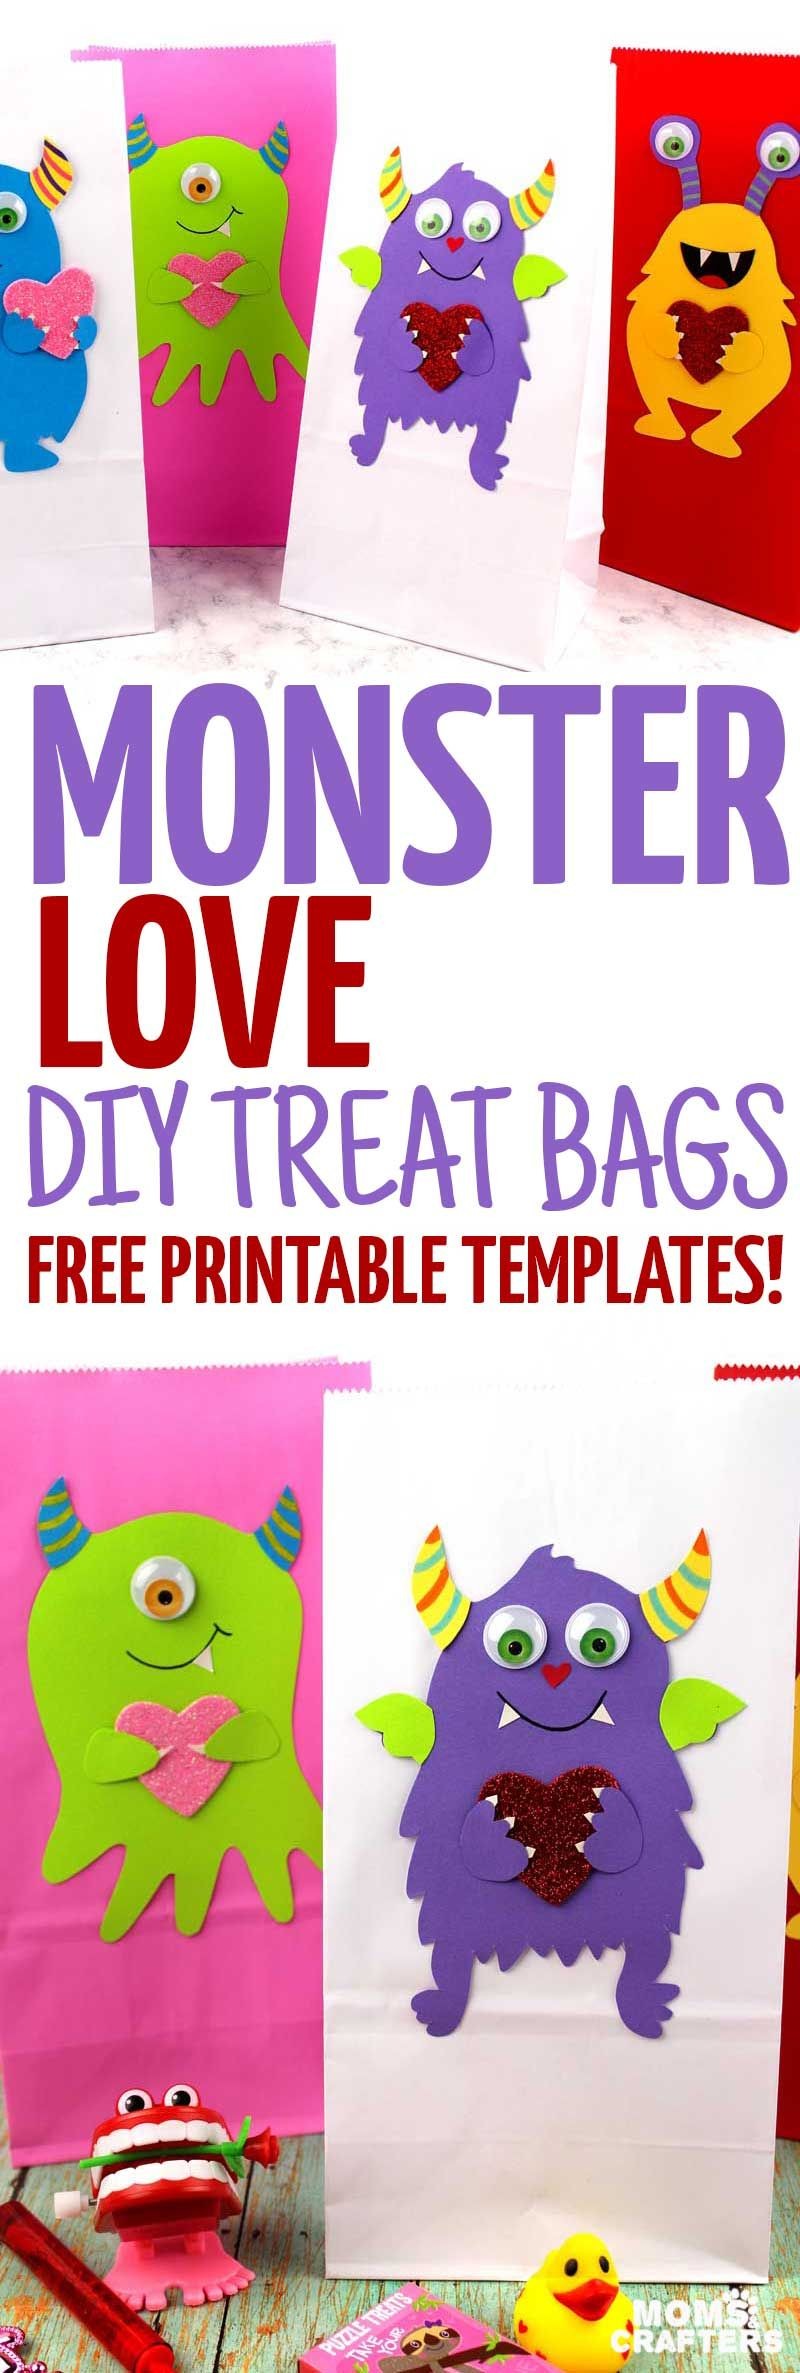 Monster Papercraft Make these Adorable Monster Love Treat Bags